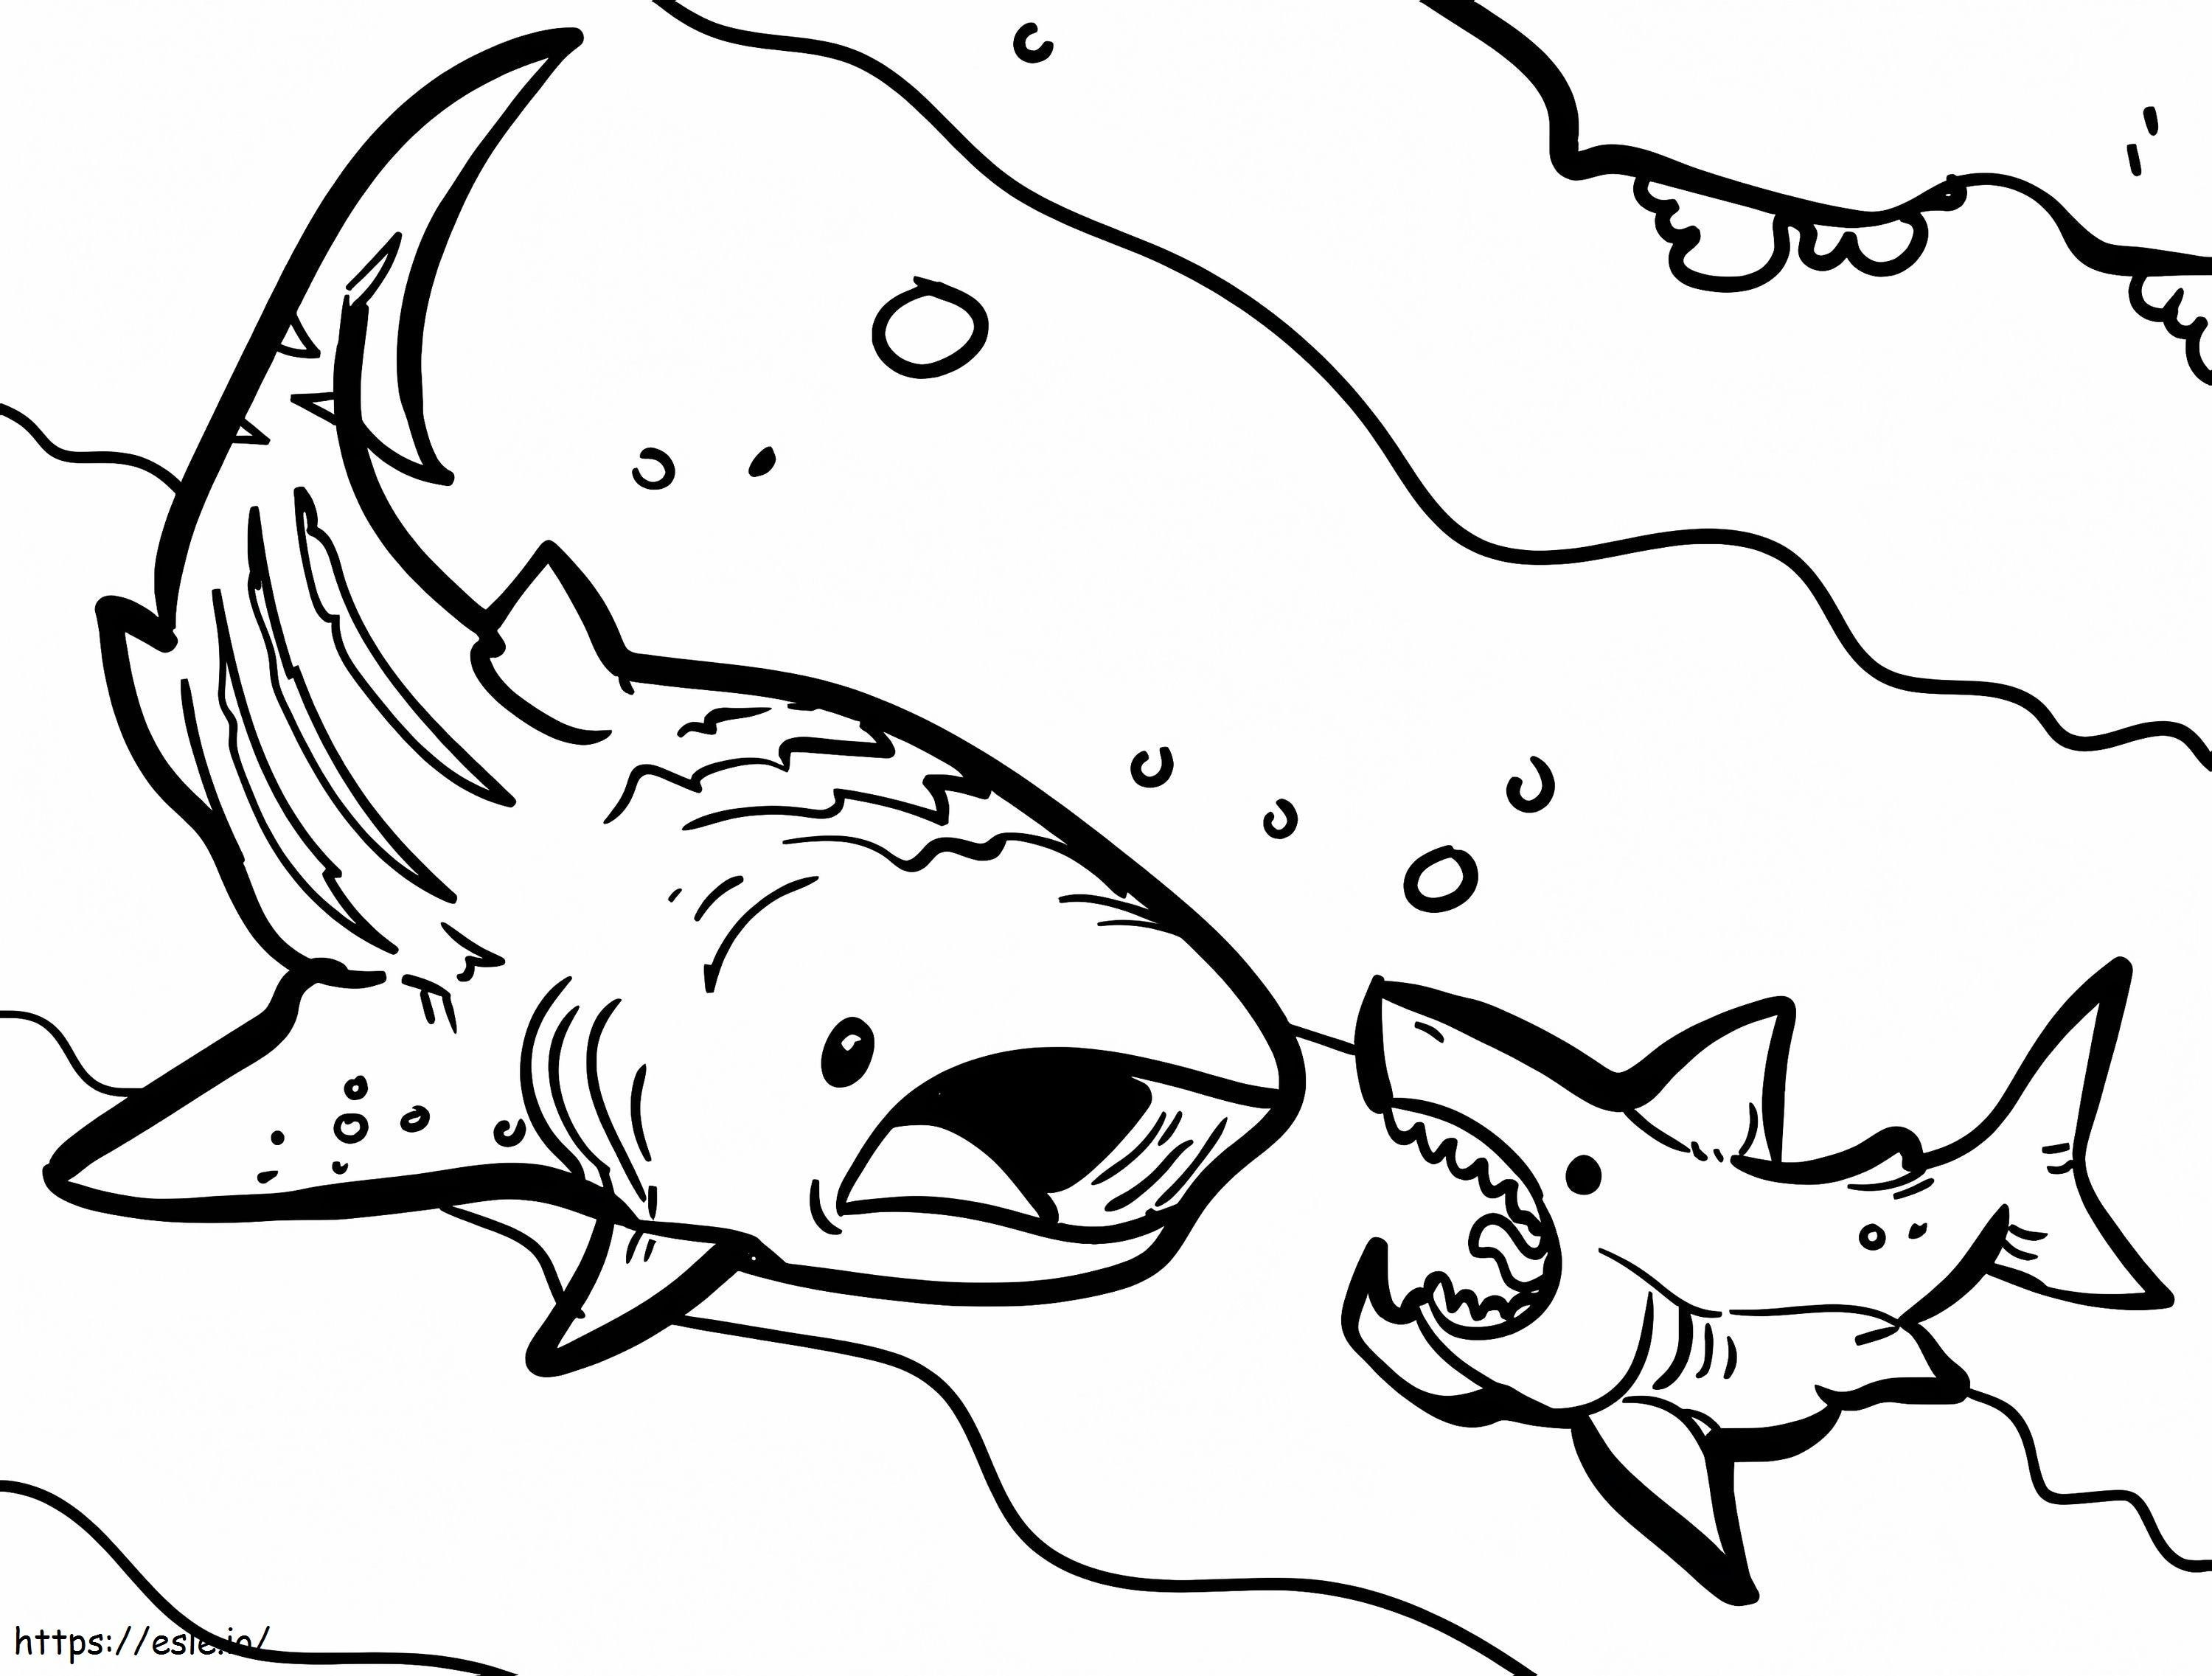 Different Sharks coloring page